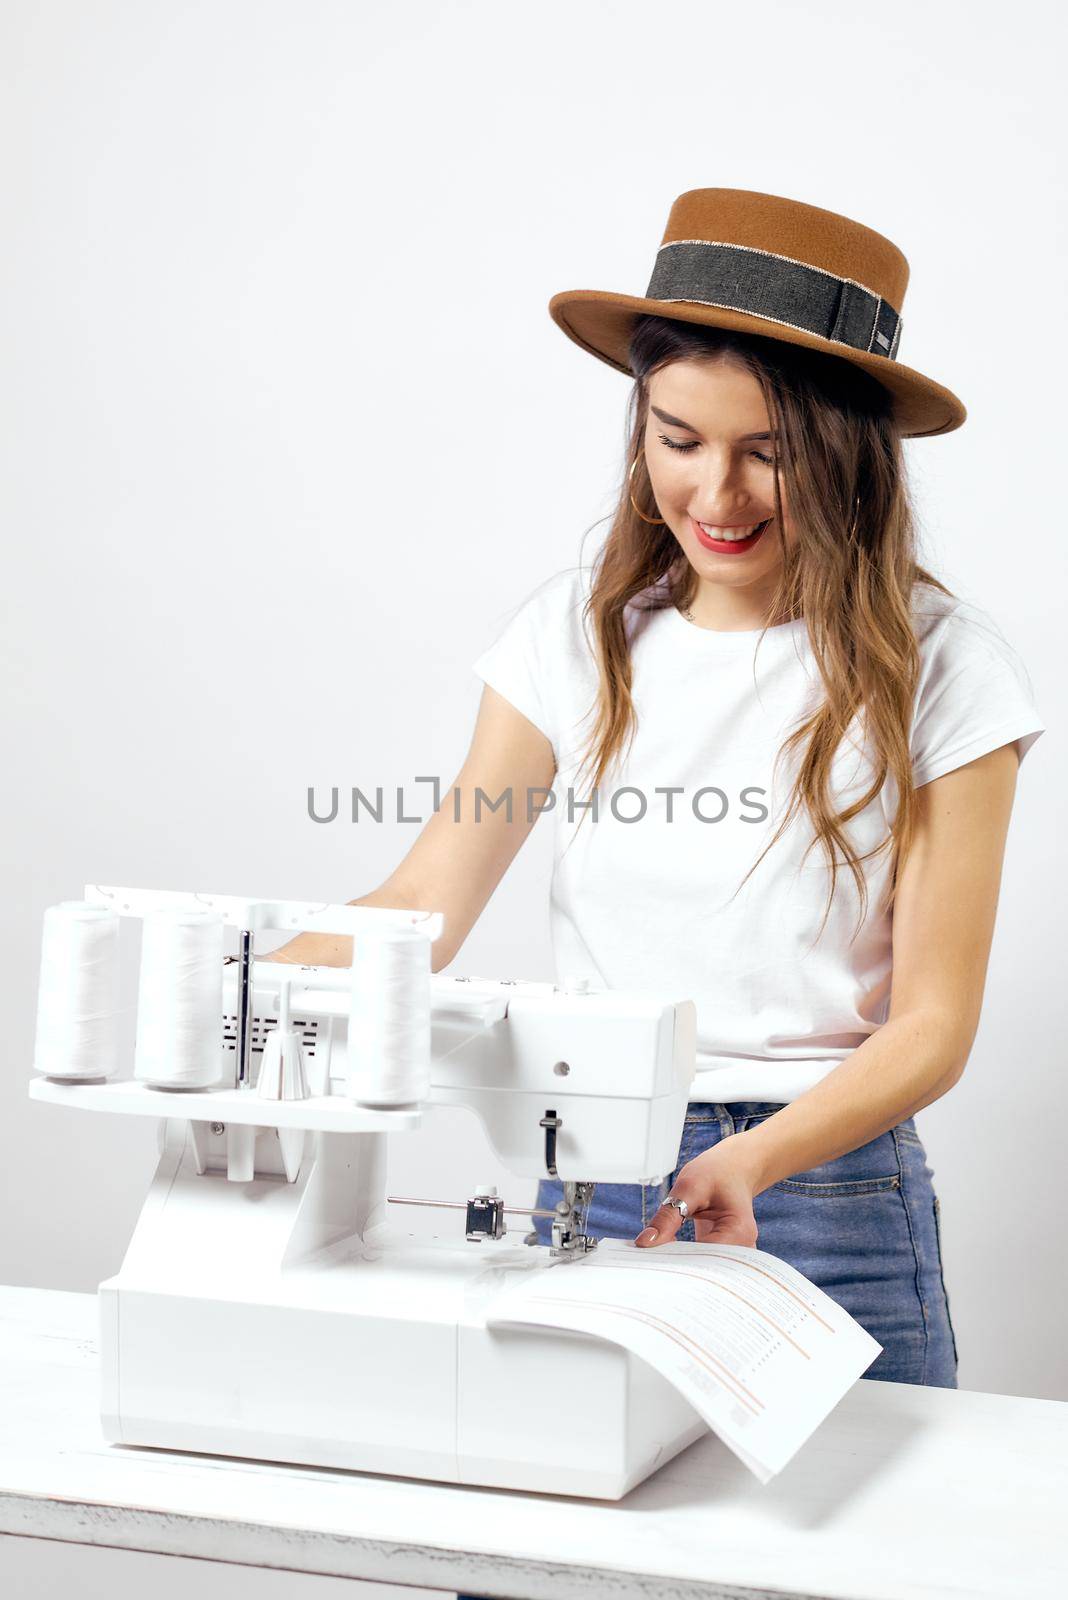 Smiling Girl with sewing machine poses for photo High quality photo